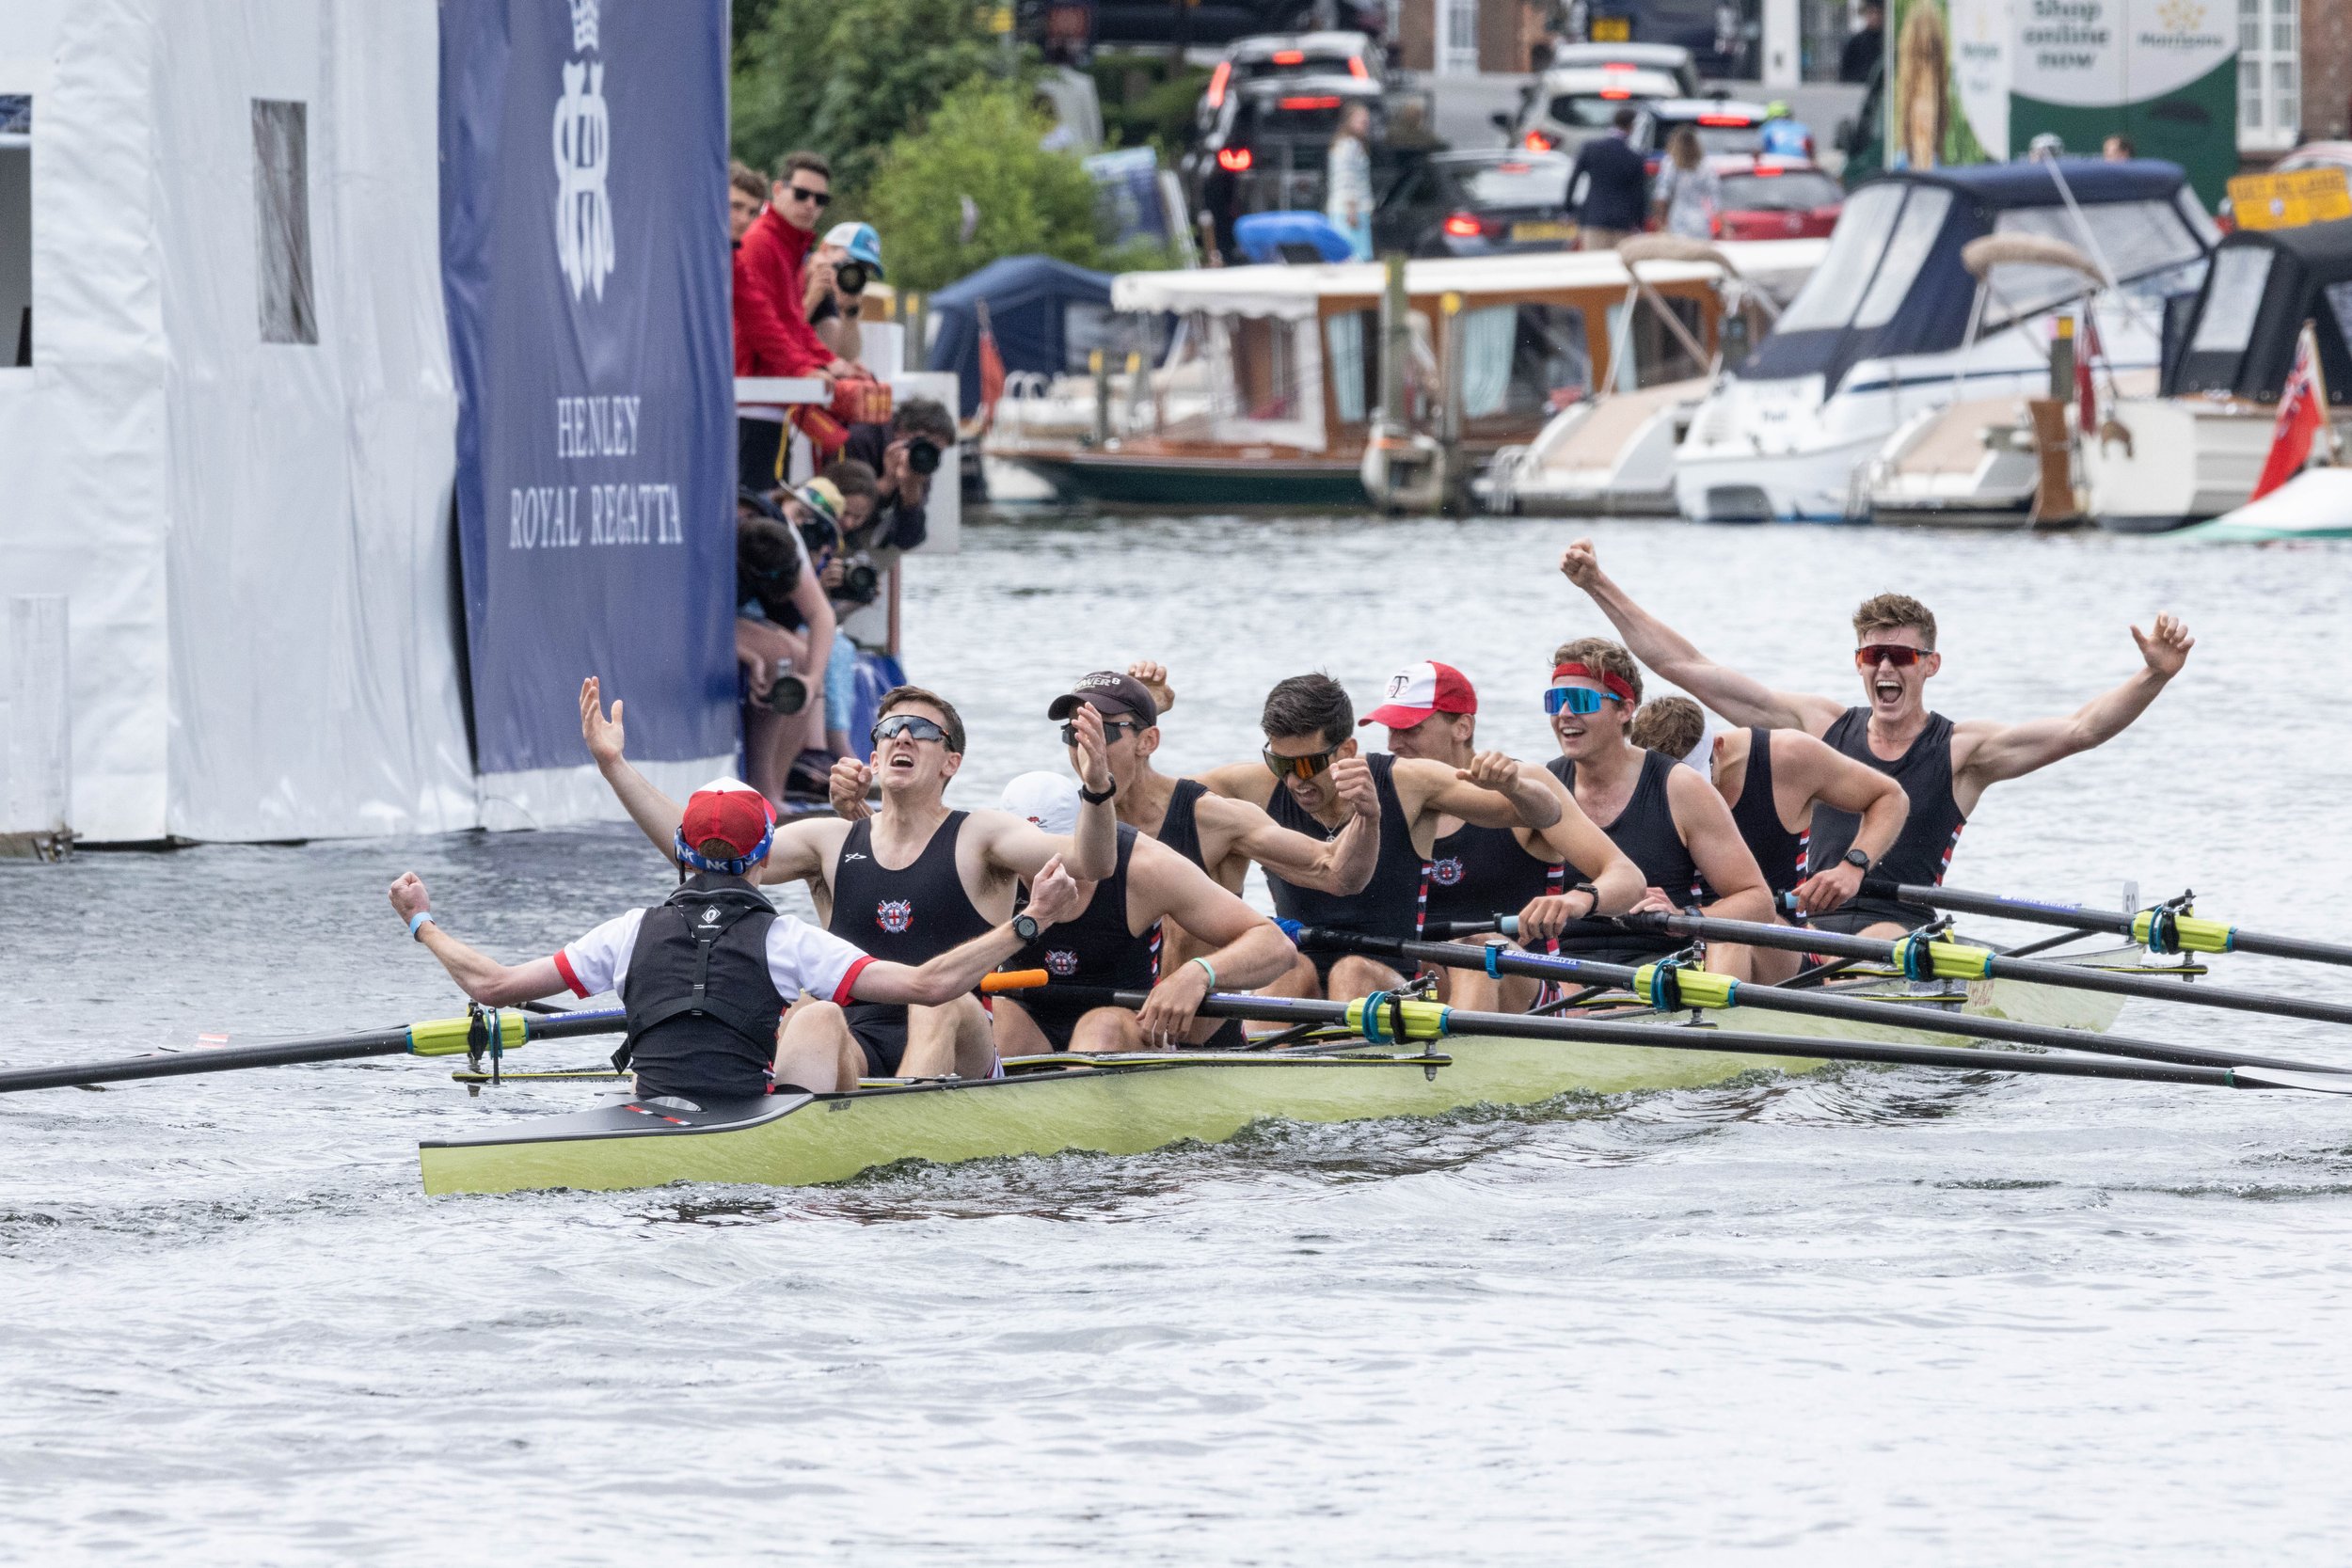 Thames Challenge Cup